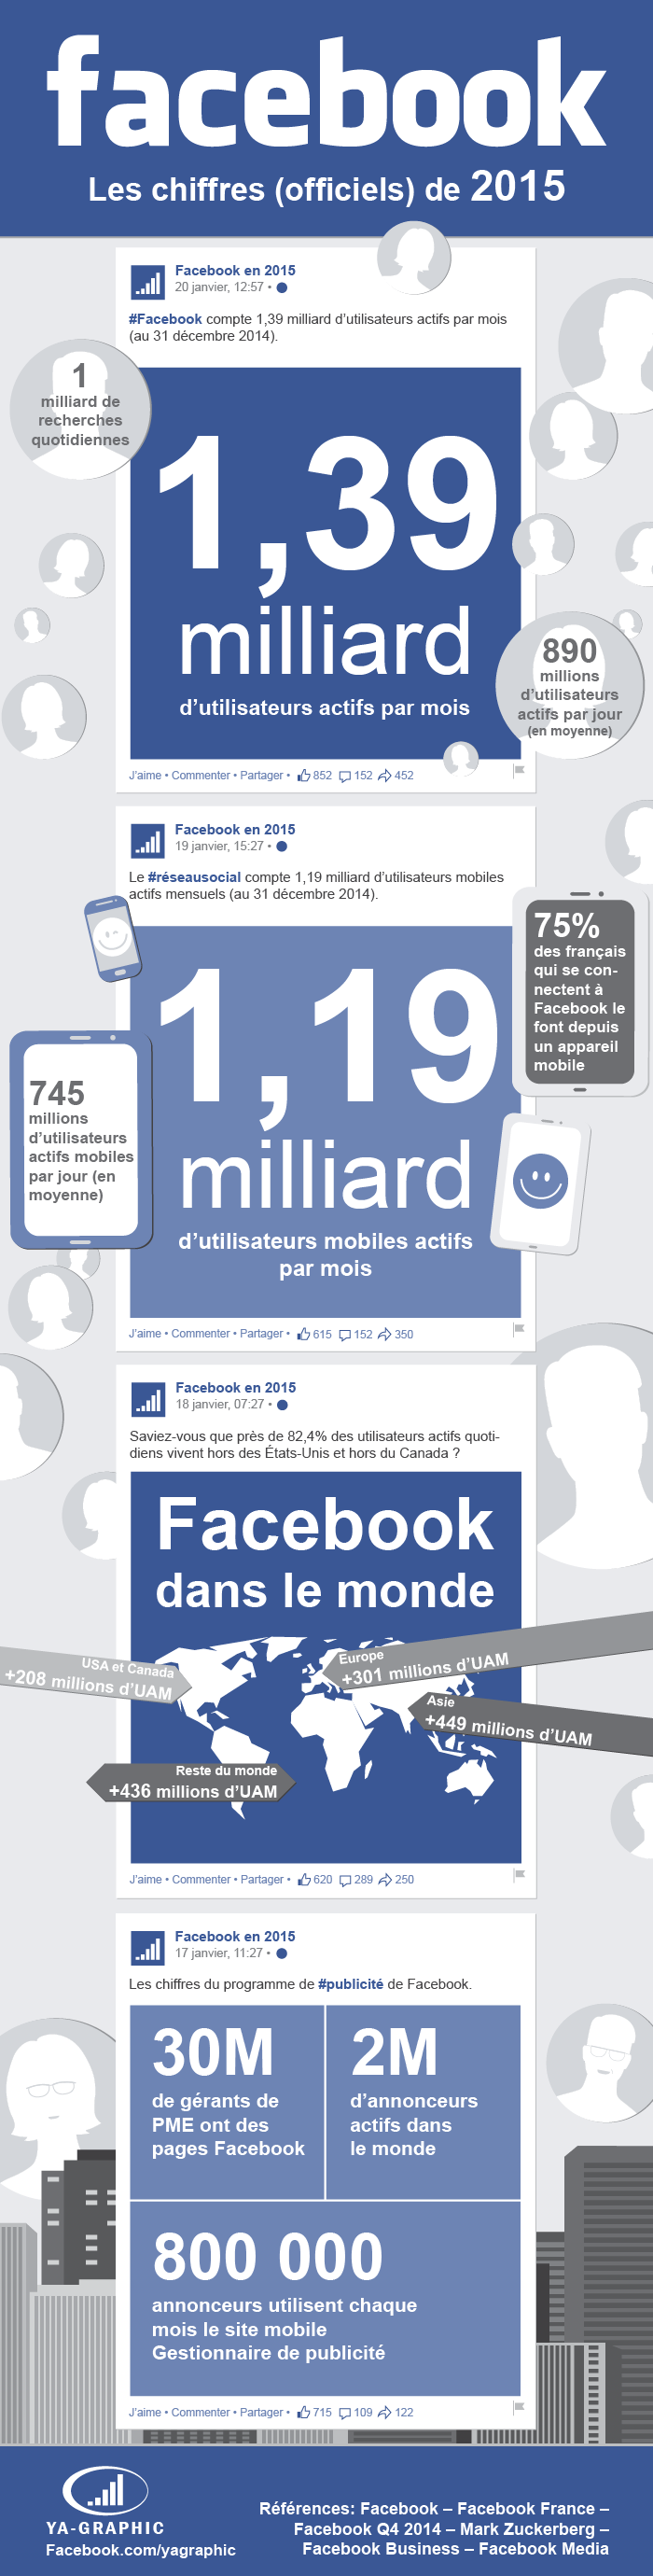 infographie-facebook-chiffres-2015